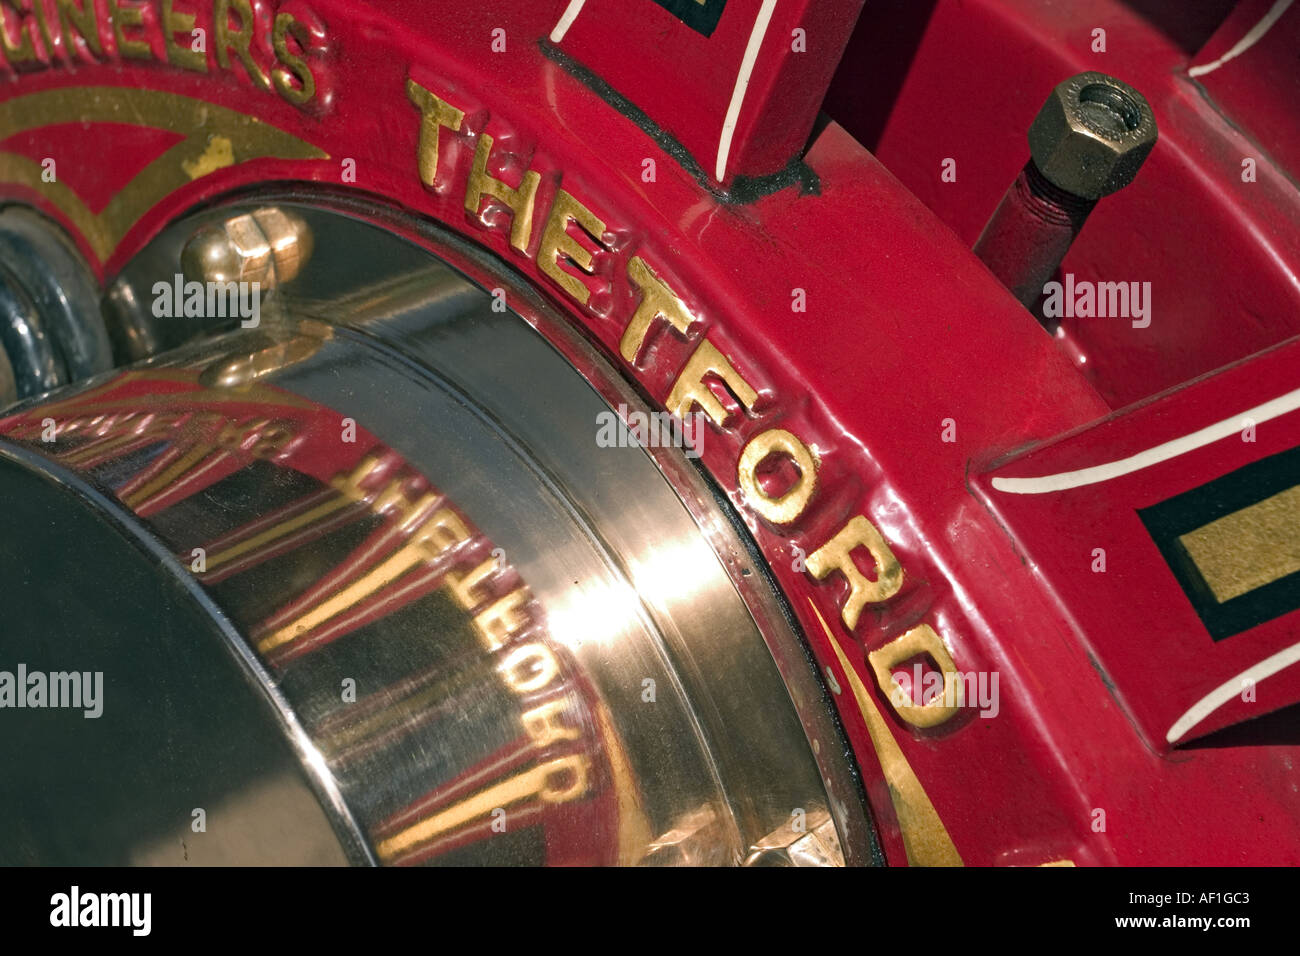 Close up of polished brass wheel bearing on vintage steam traction engine circa 1930 showing Thetford England markings Stock Photo